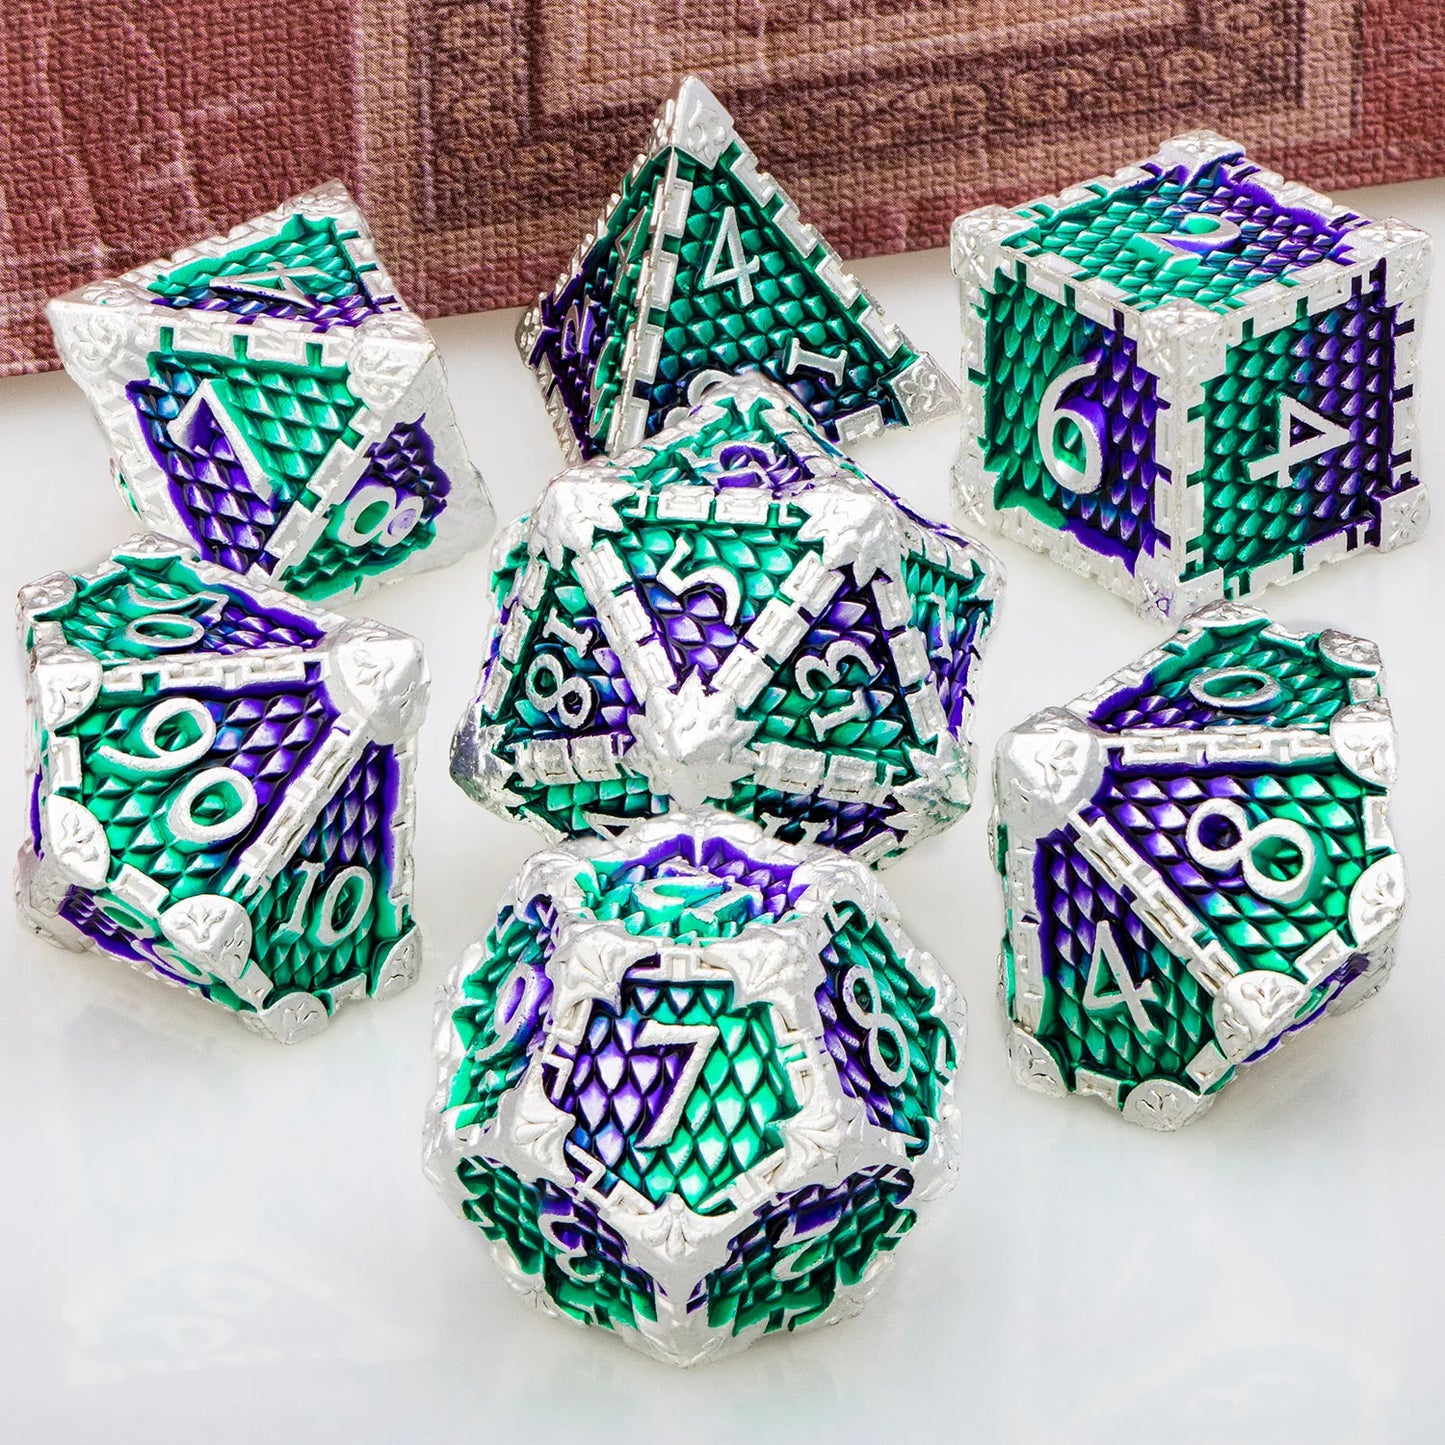 DND Metal Dice Set Dragon Scale D&D Dice Dungeon and Dragon Role Playing Games Black Green Polyhedral Dice RPG D and D Dice Silver-Green Purple